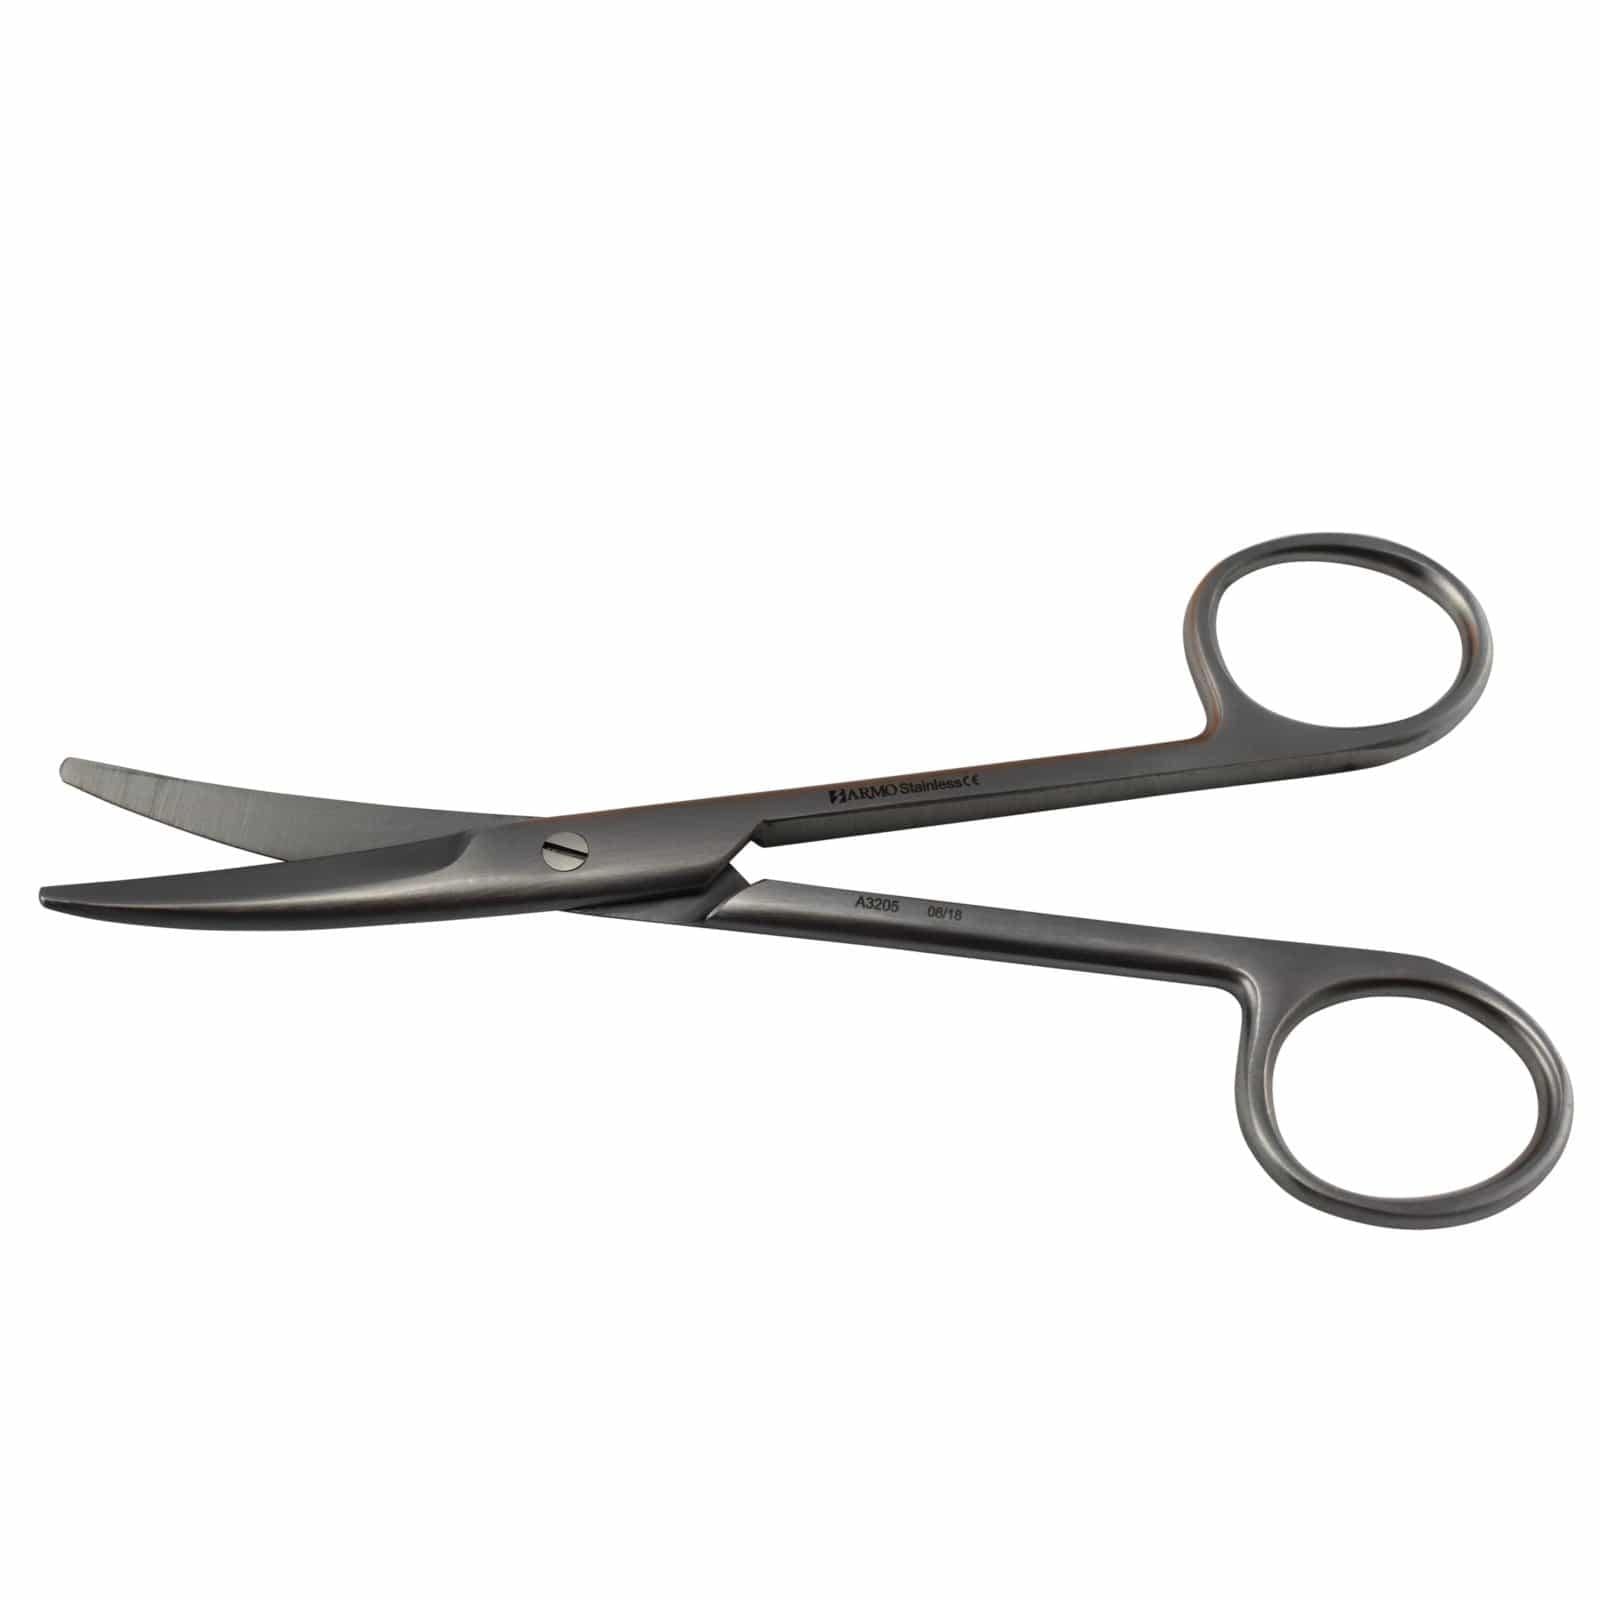 Armo Surgical Instruments 15.5cm / Curved / Standard Armo Mayo Scissors